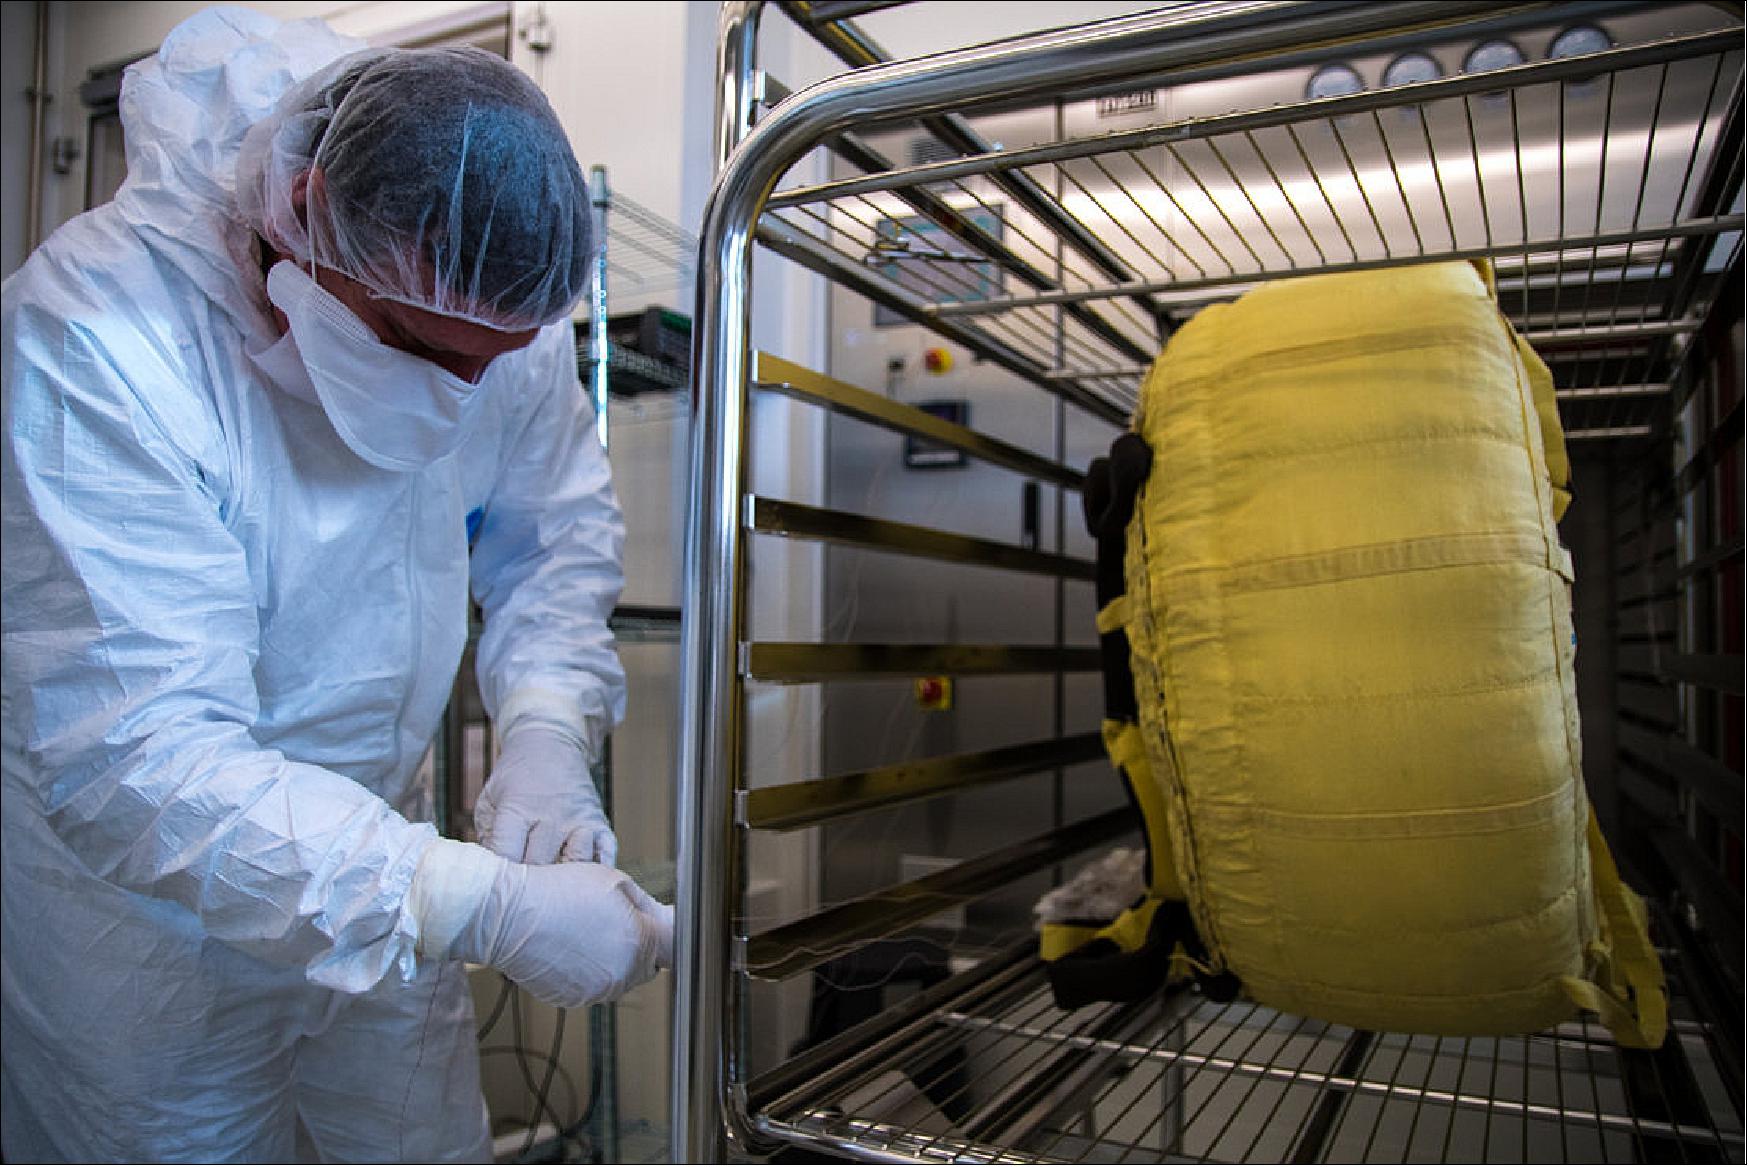 Figure 74: A technician places a nearly 70 kg parachute designed for ESA and Roscosmos’s ExoMars 2020 mission inside the dry heater sterilizer of the Agency’s Life, Physical Sciences and Life Support Laboratory, based in its Netherlands technical center (image credit: ESA, M. Cowan)